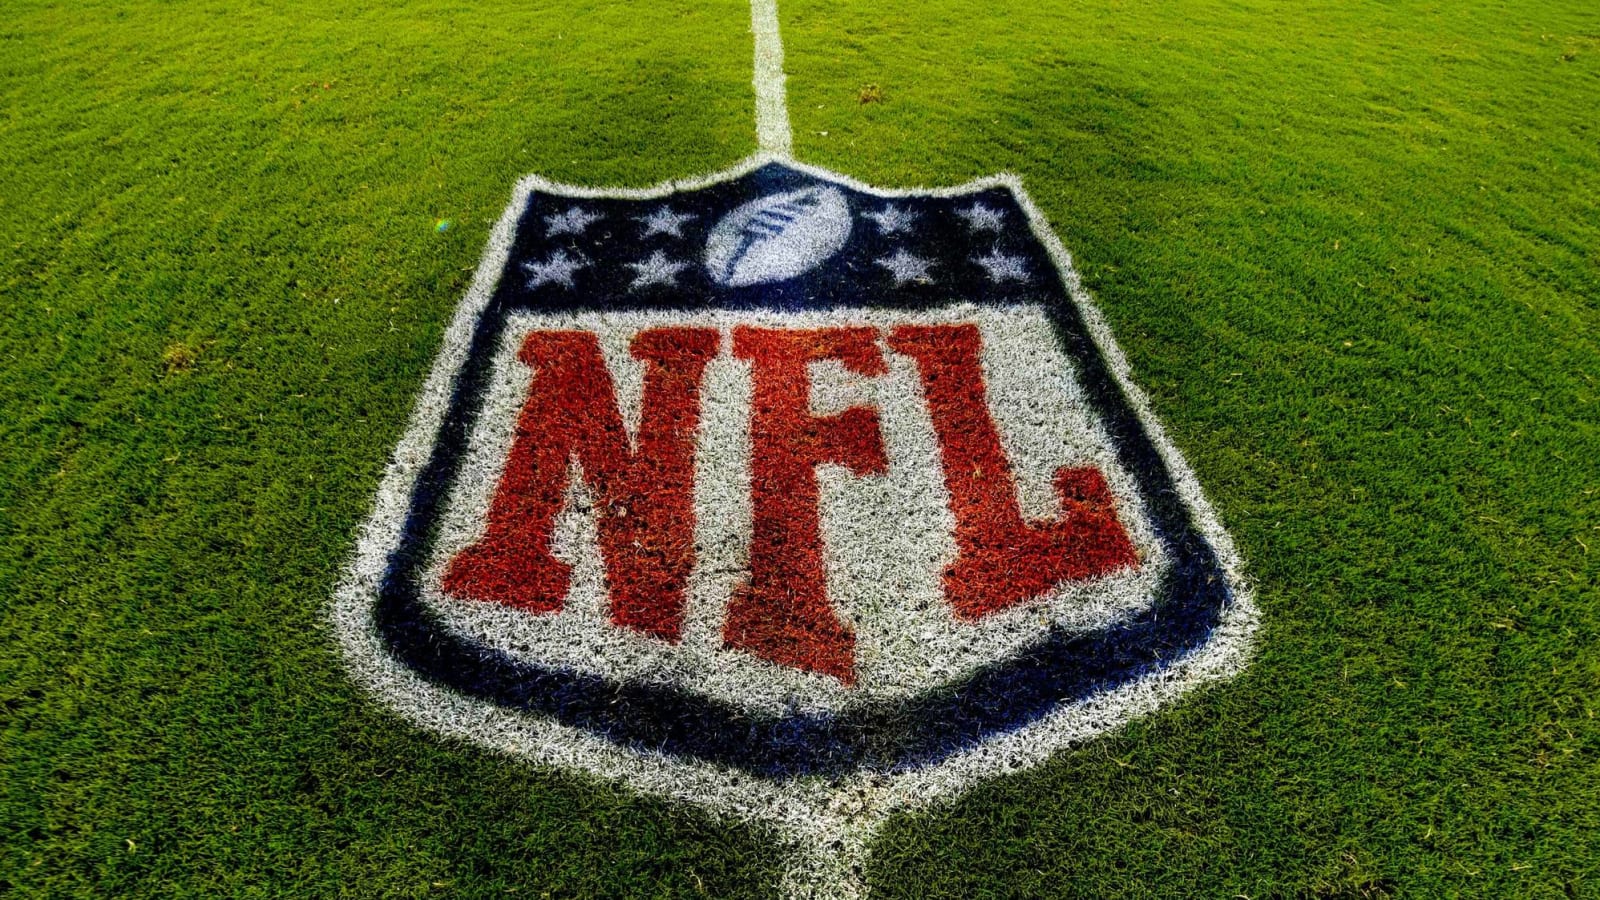 65% of NFL players have received at least one COVID vaccine dose